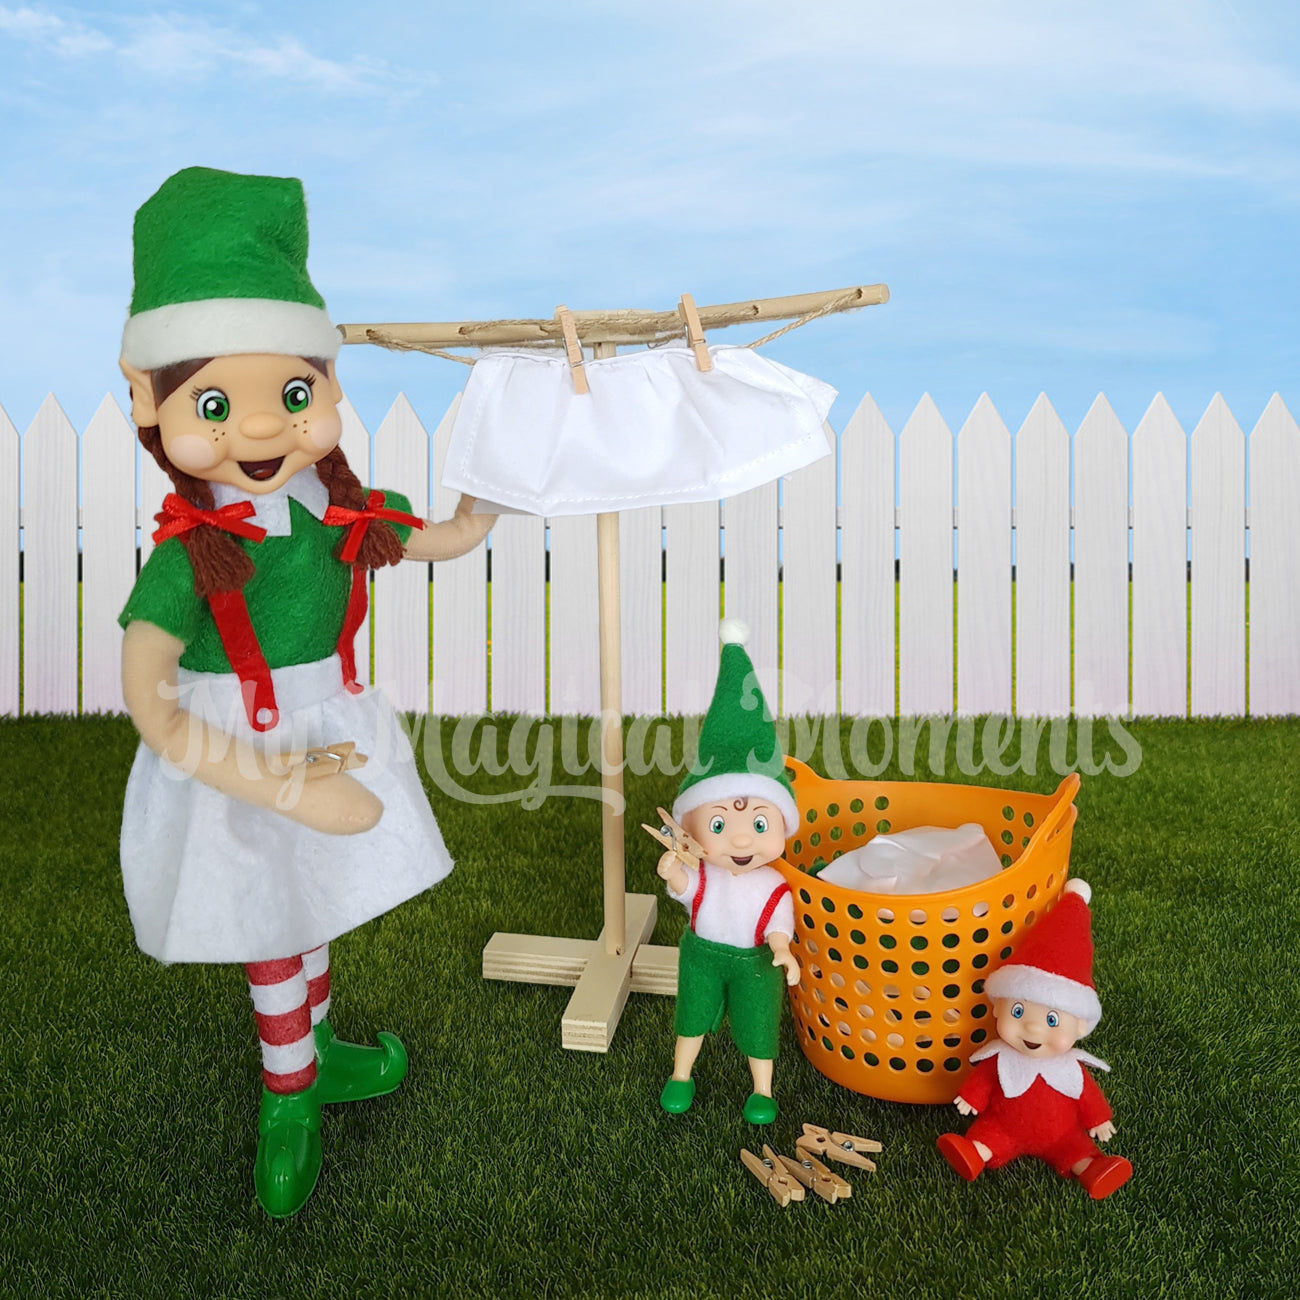 Elf hanging out washing on her miniature clothesline and elf children